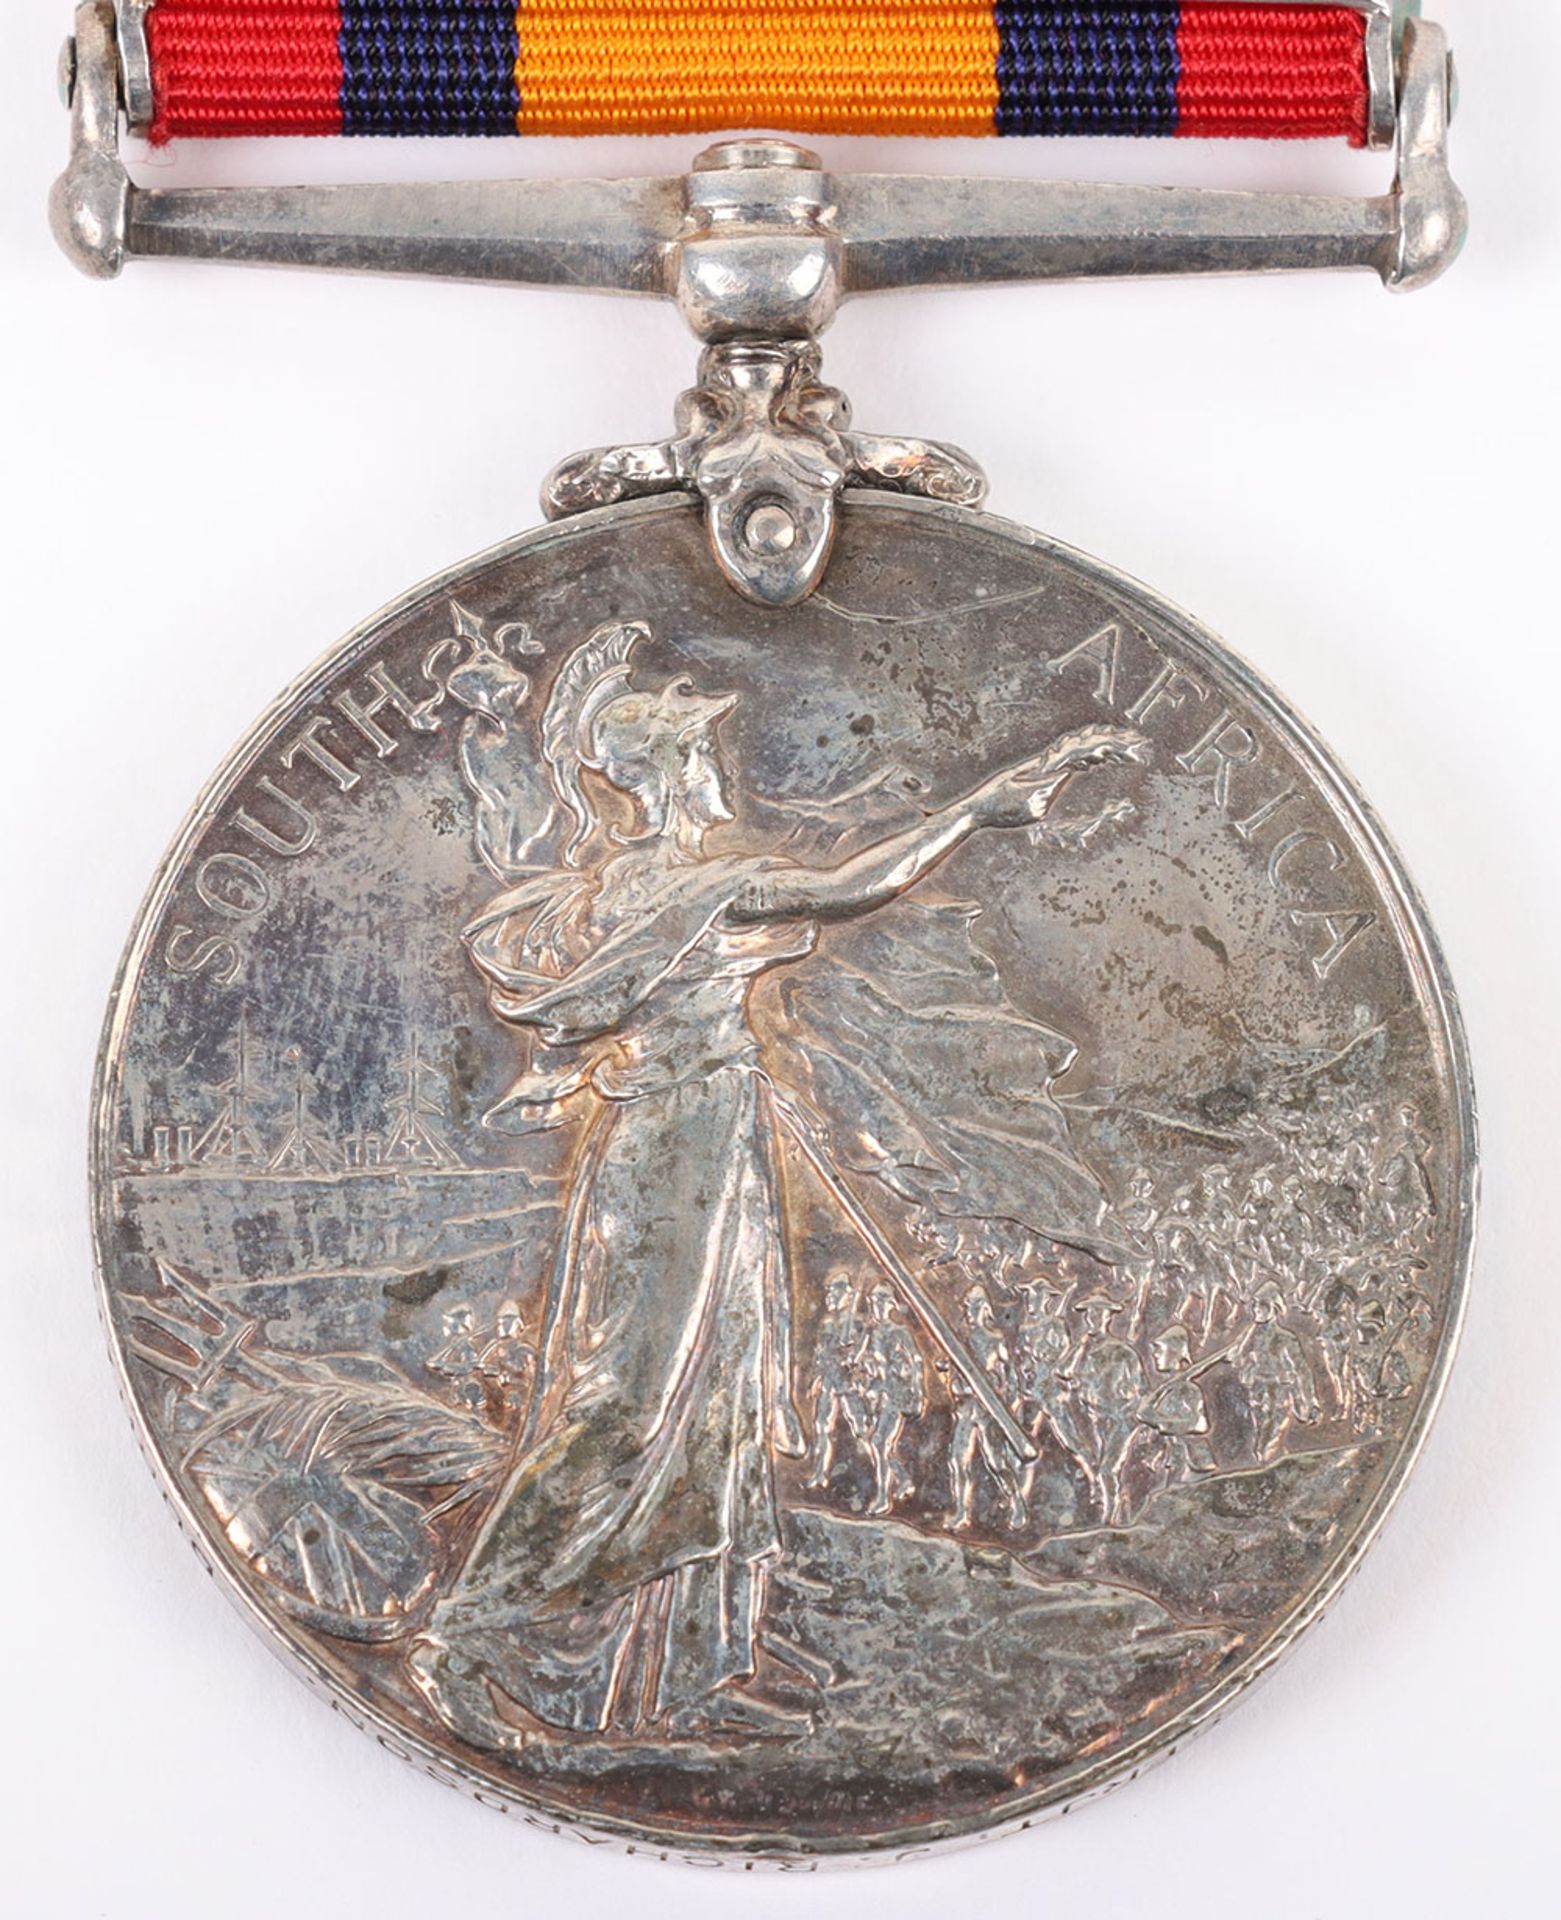 Queens South Africa Medal 4th Battalion the Durham Light Infantry - Image 6 of 7